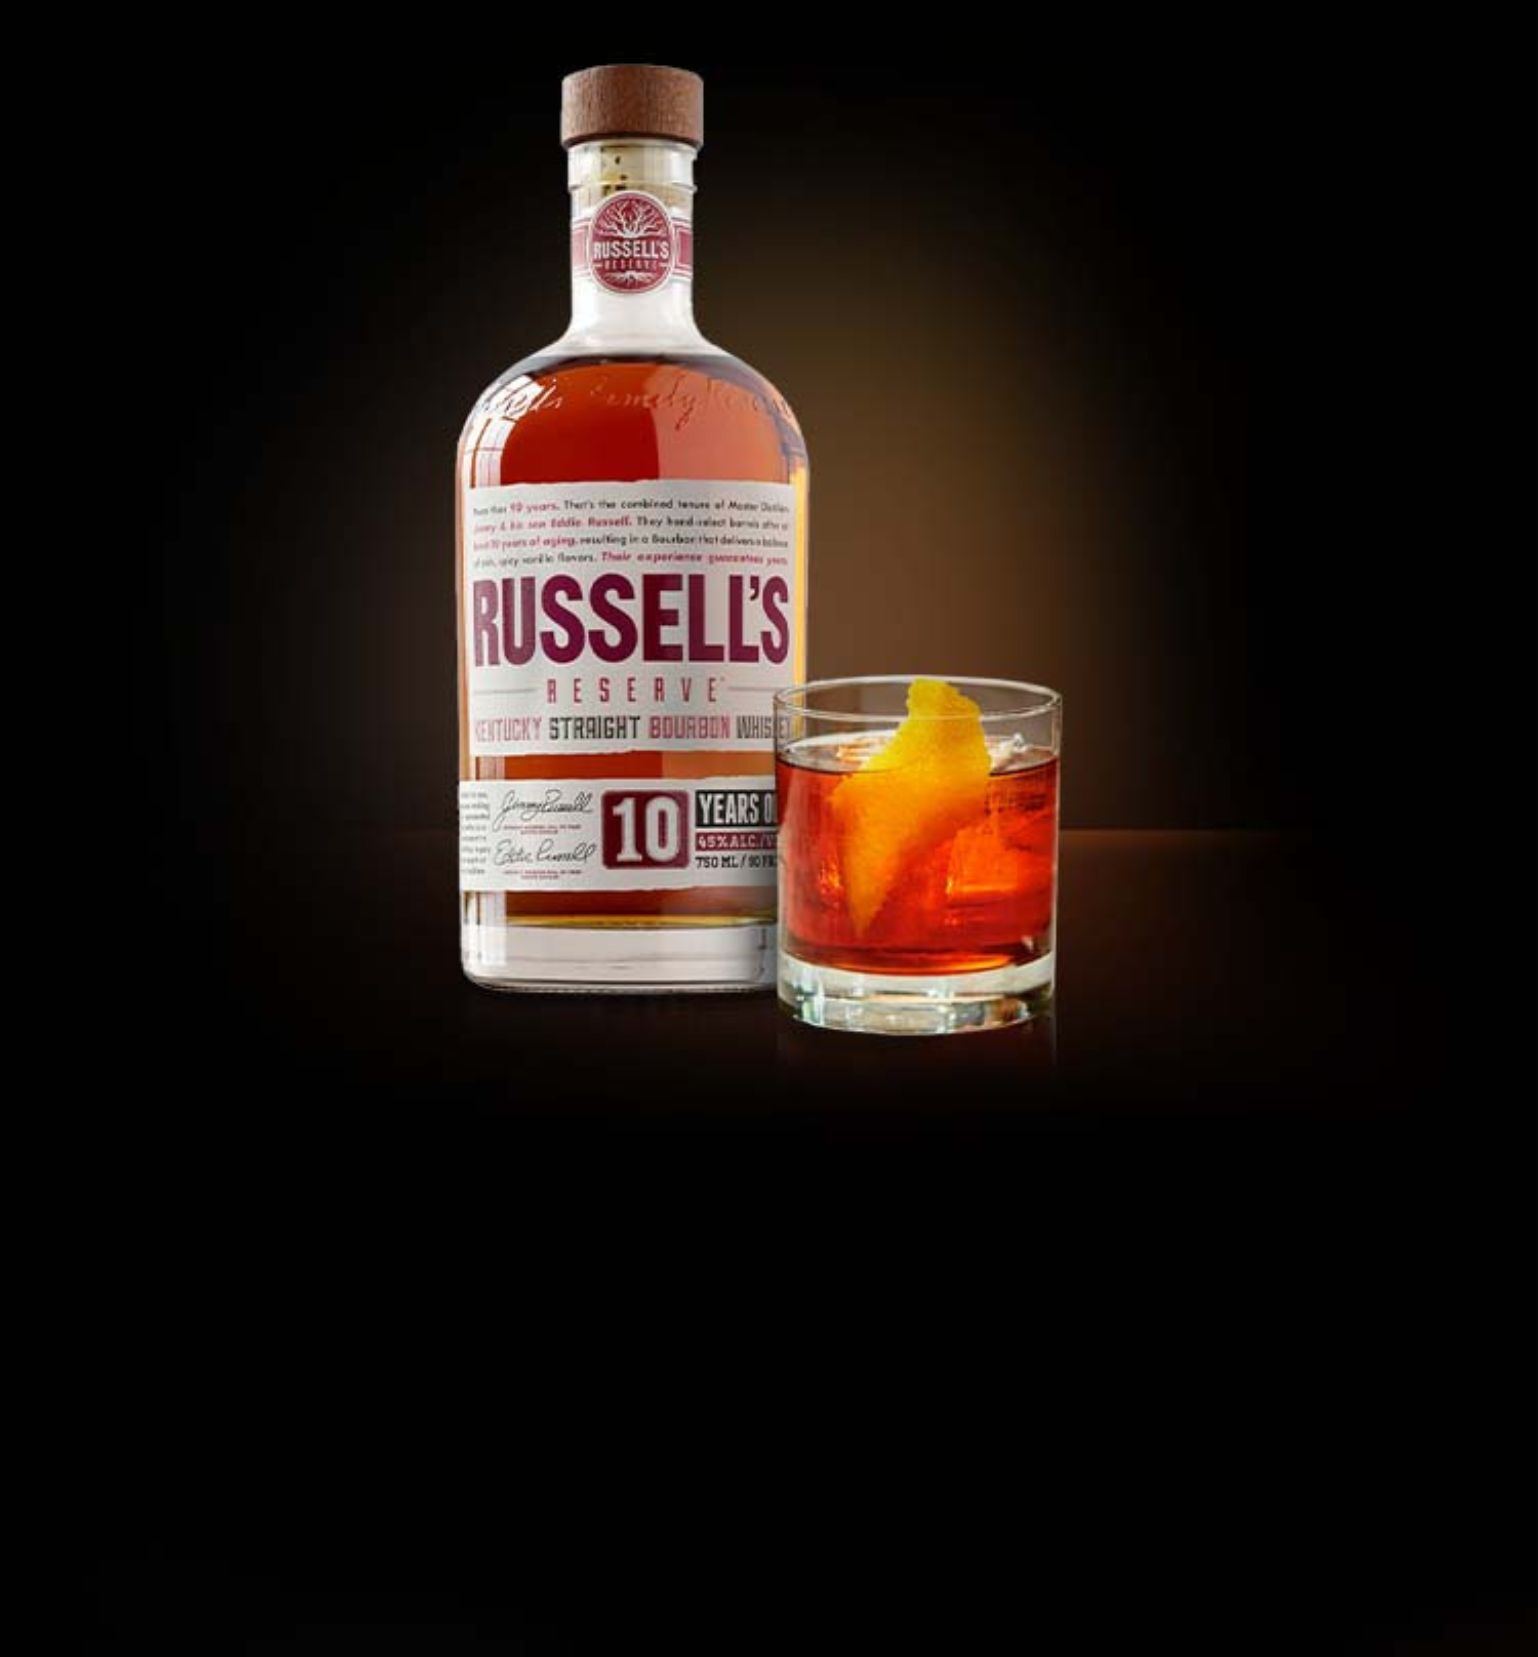 The Russells Reserve Boulevardier Cocktail